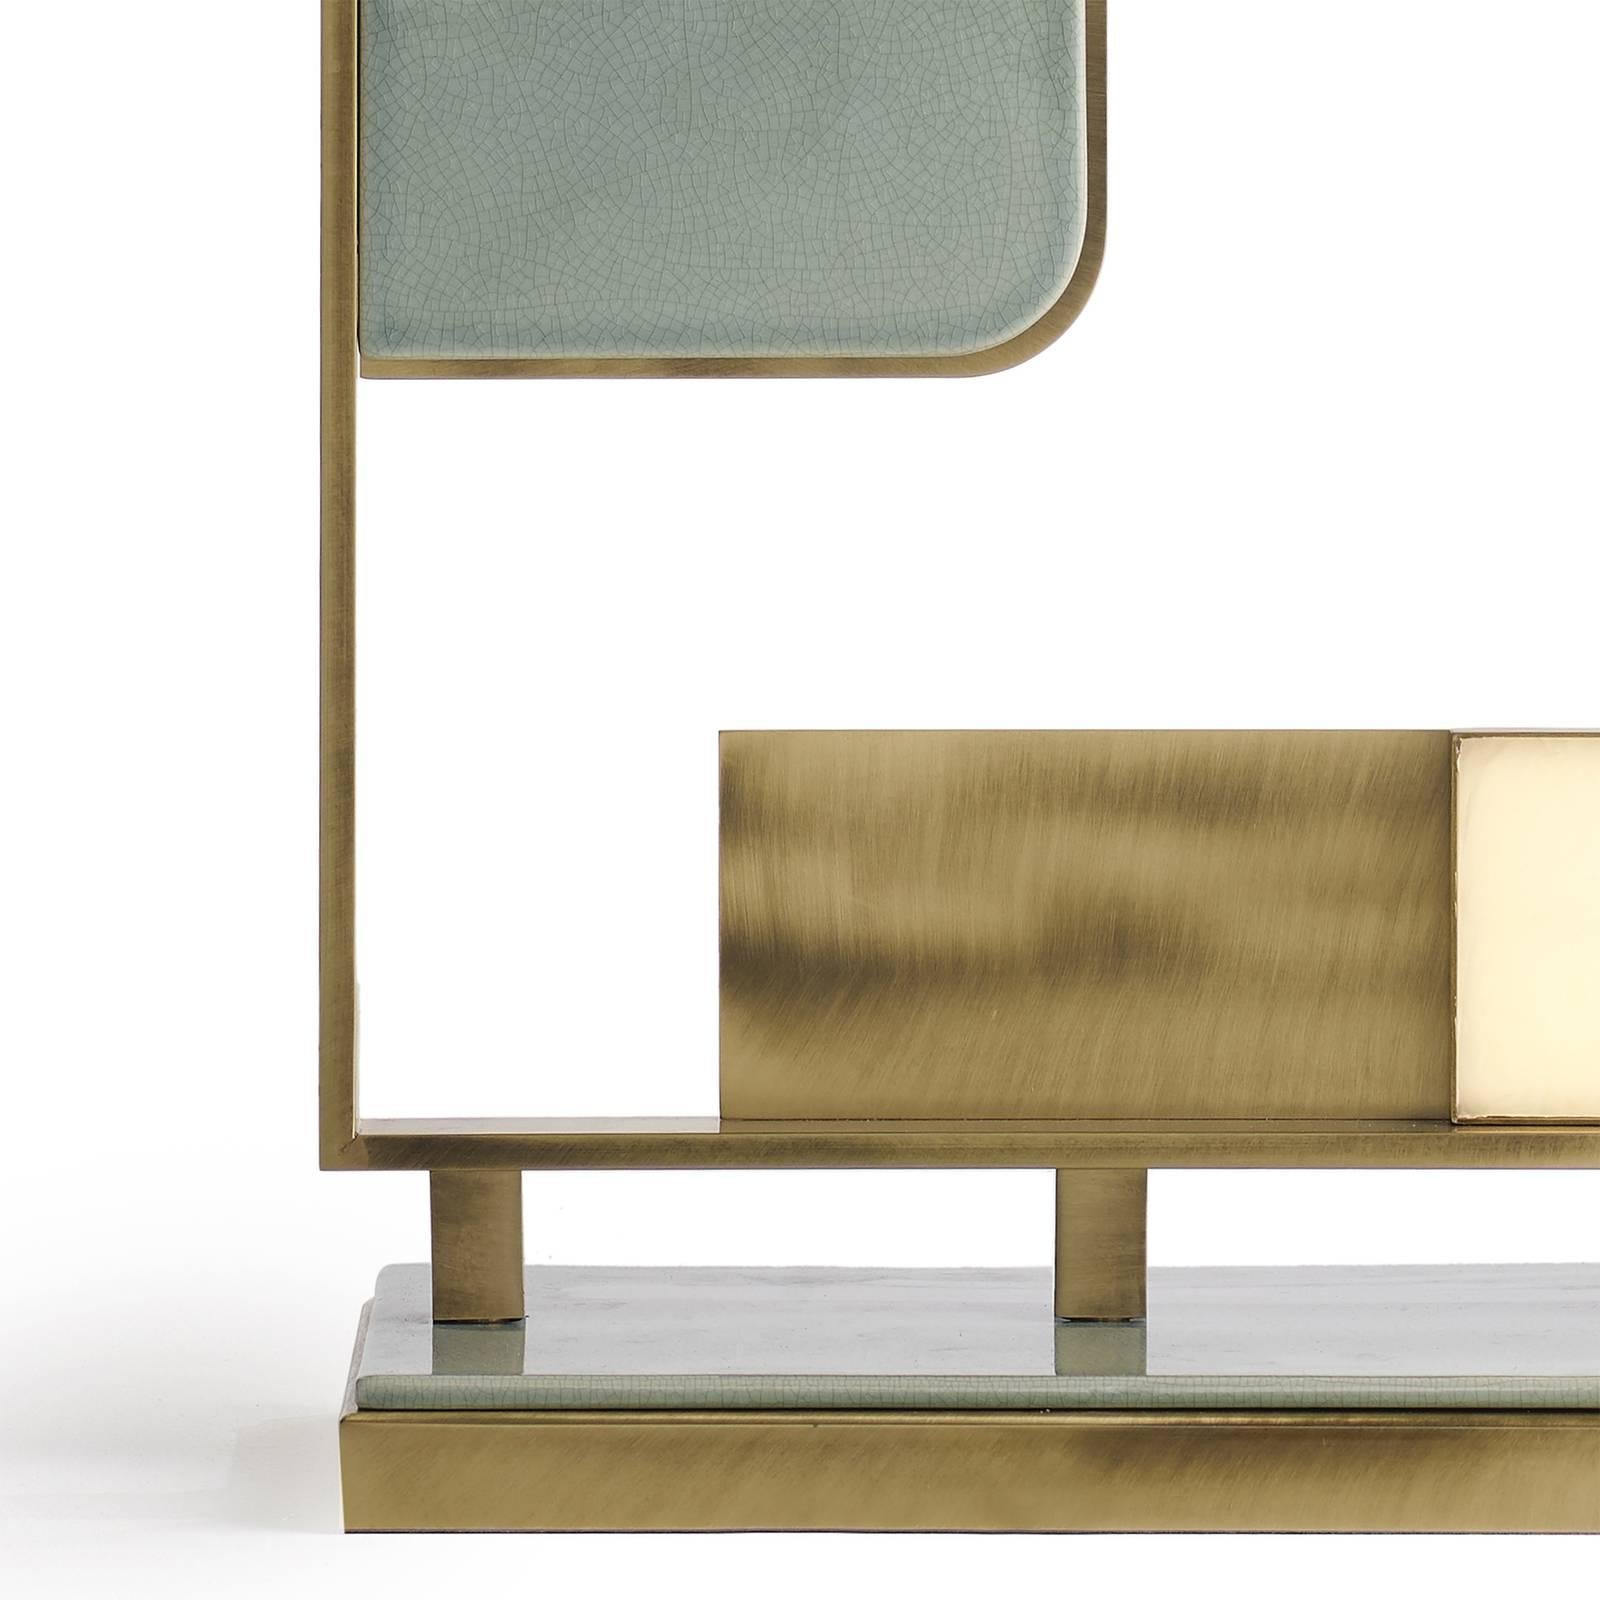 An eye-catching addition to a contemporary or modern decor, this tall table lamp is a unique piece off functional decor that provides a room with light, coming from OLED by LG panels, and an exquisite decoration, thanks to its brushed brass